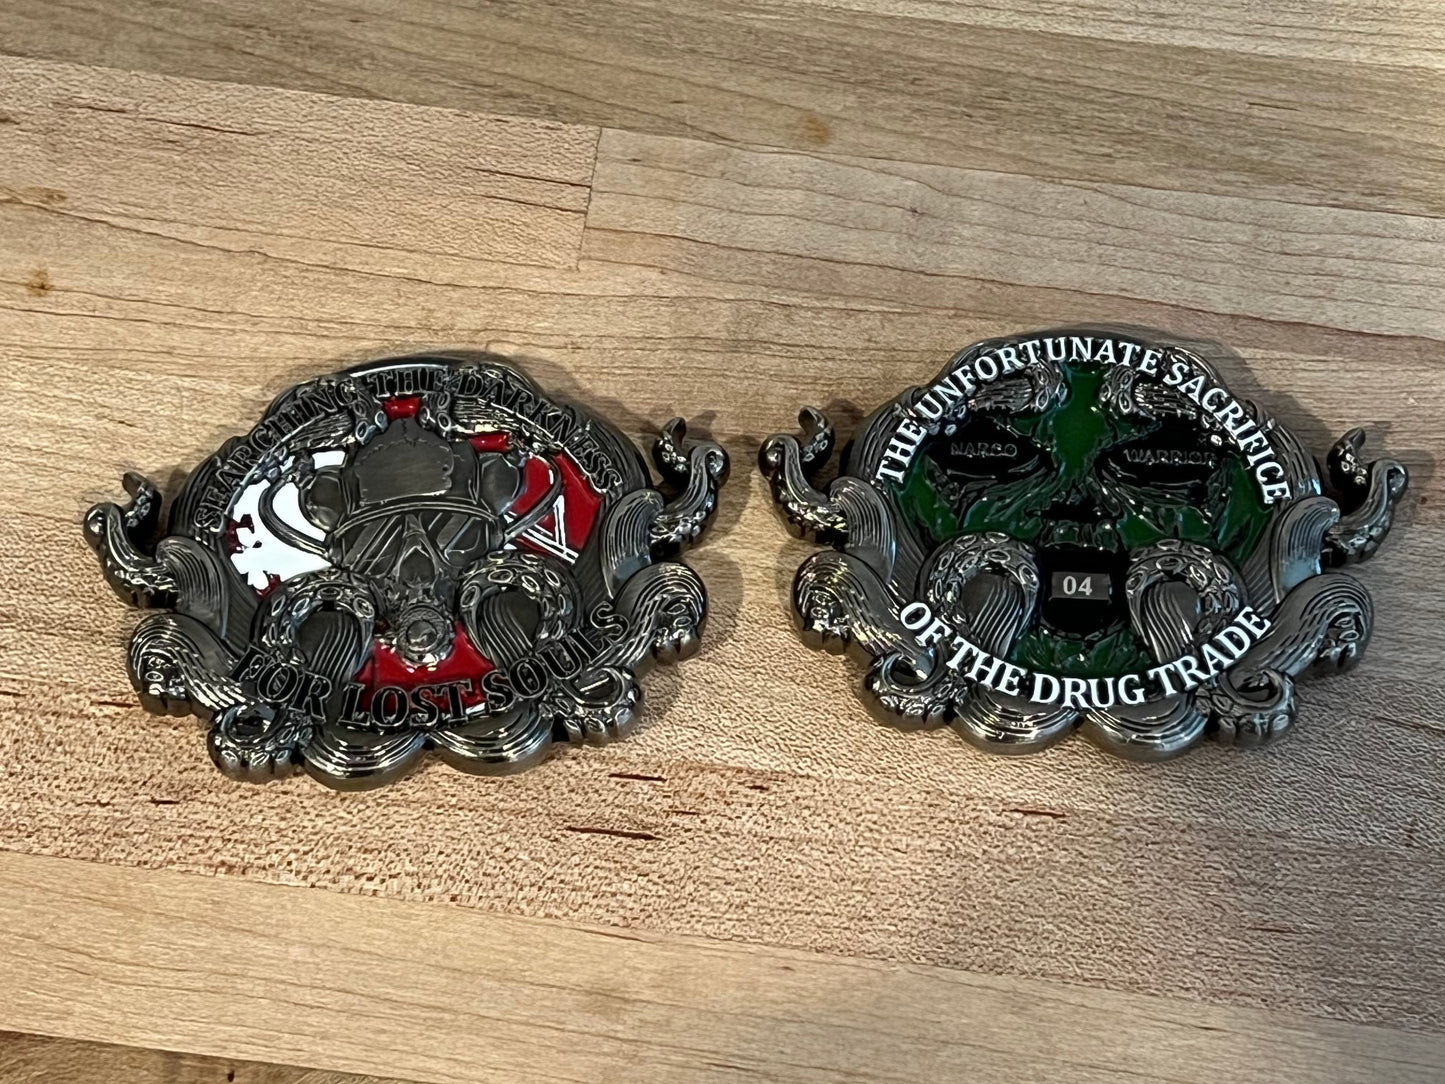 LOST SOULS - Narco Warrior - Custom Challenge Coins from Beyond The Line 